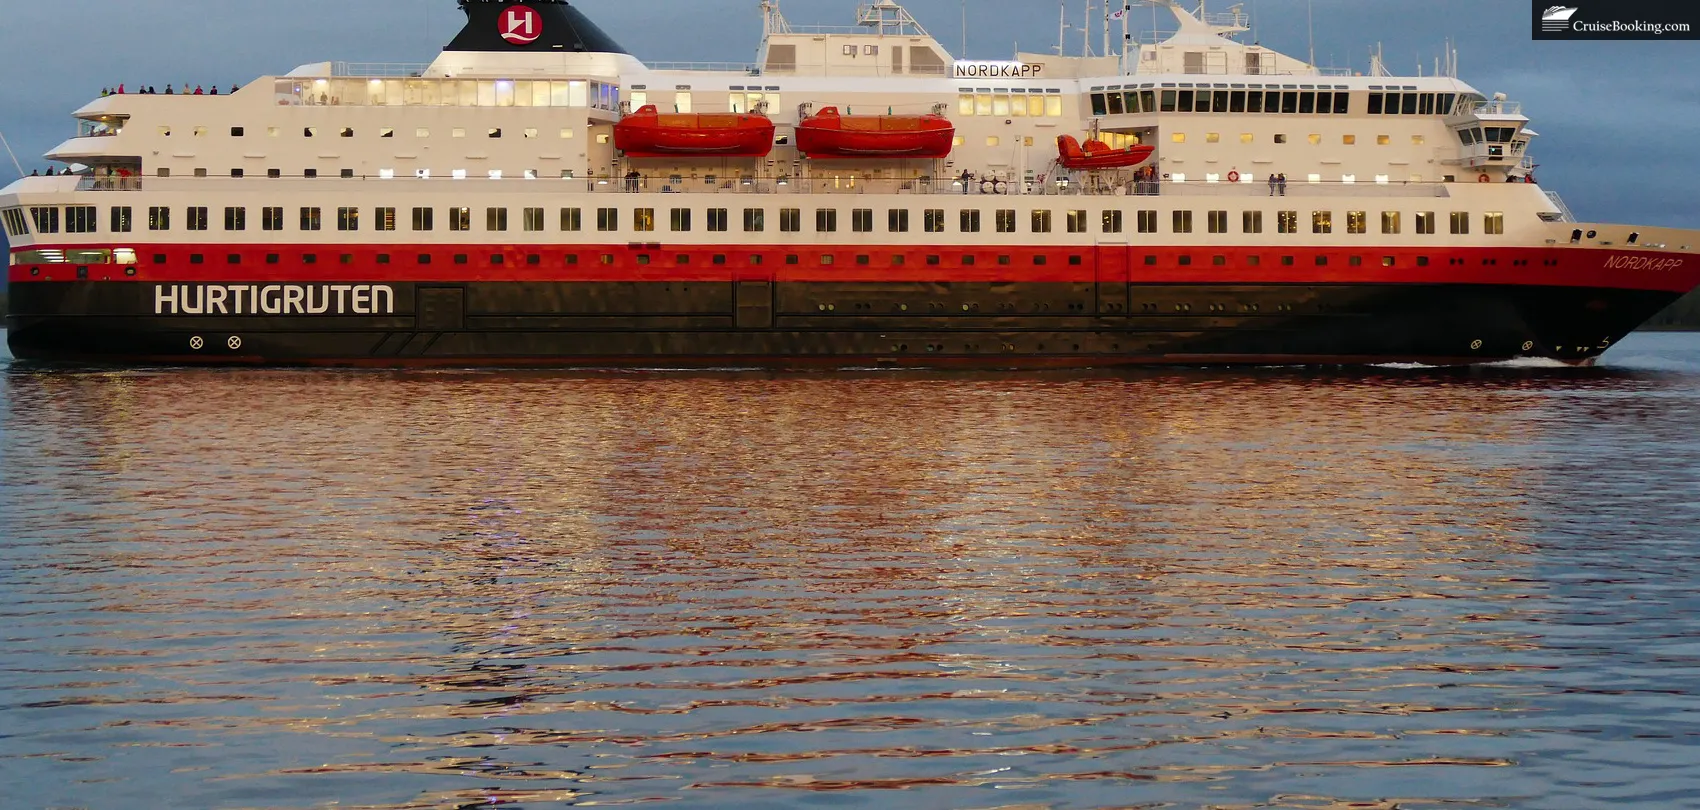 Ships from Hurtigruten will be zero-emission by 2030